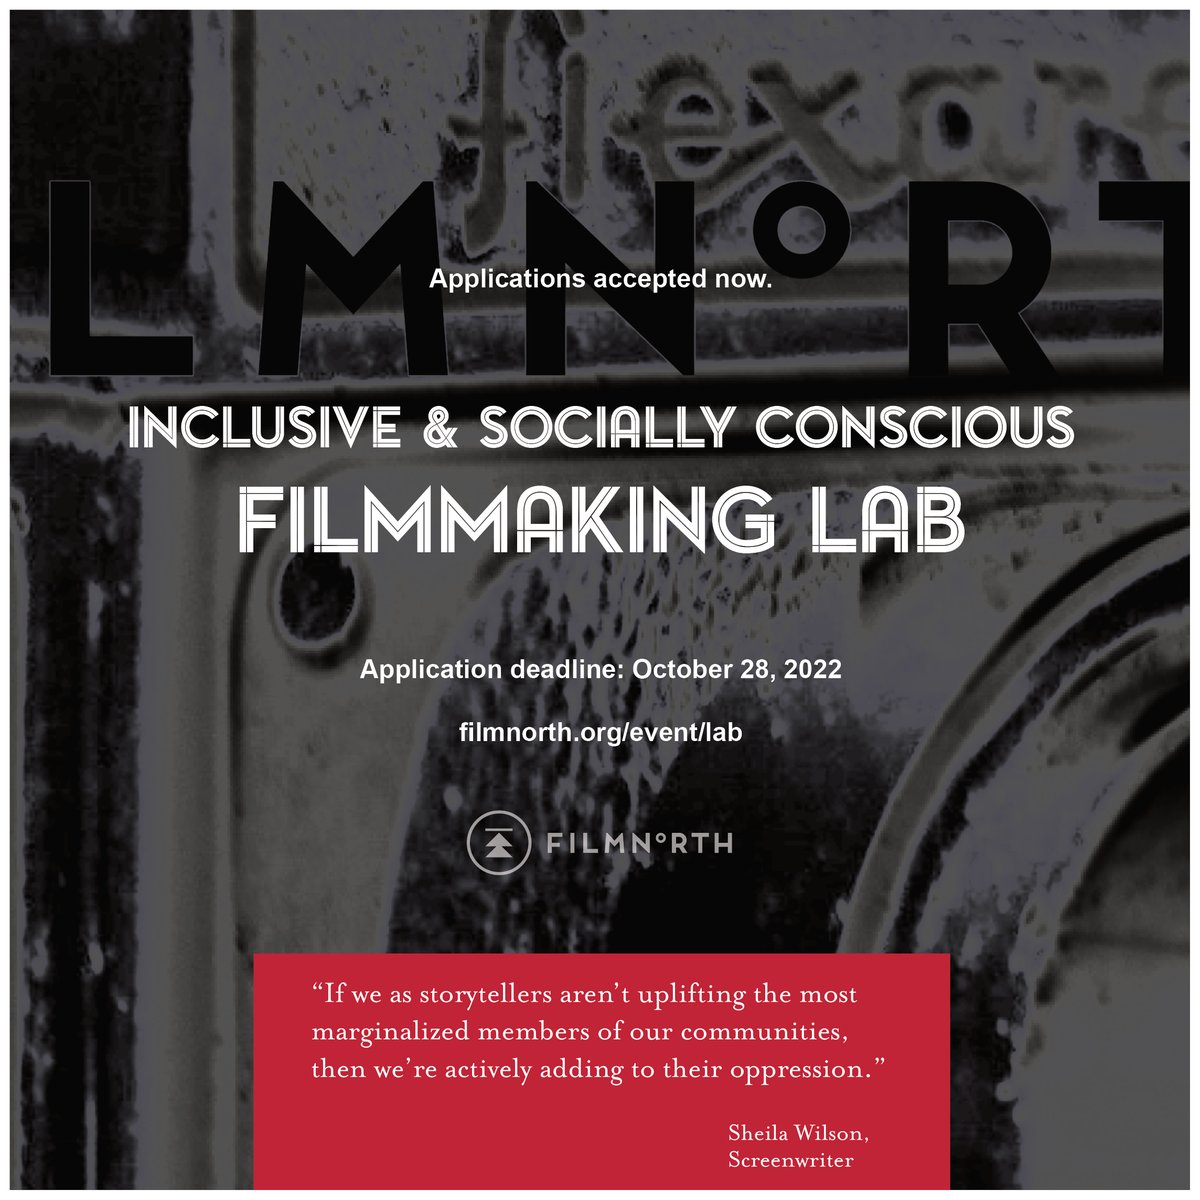 Our friends @MyFilmNorth are excited to announce the launch of their Inclusive and Socially Conscious Filmmaking Lab, supported in part by the NEA. The program will run for 6 weeks starting Nov 10. Applications close October 28, 2022. For more info: filmnorth.org/event/lab/